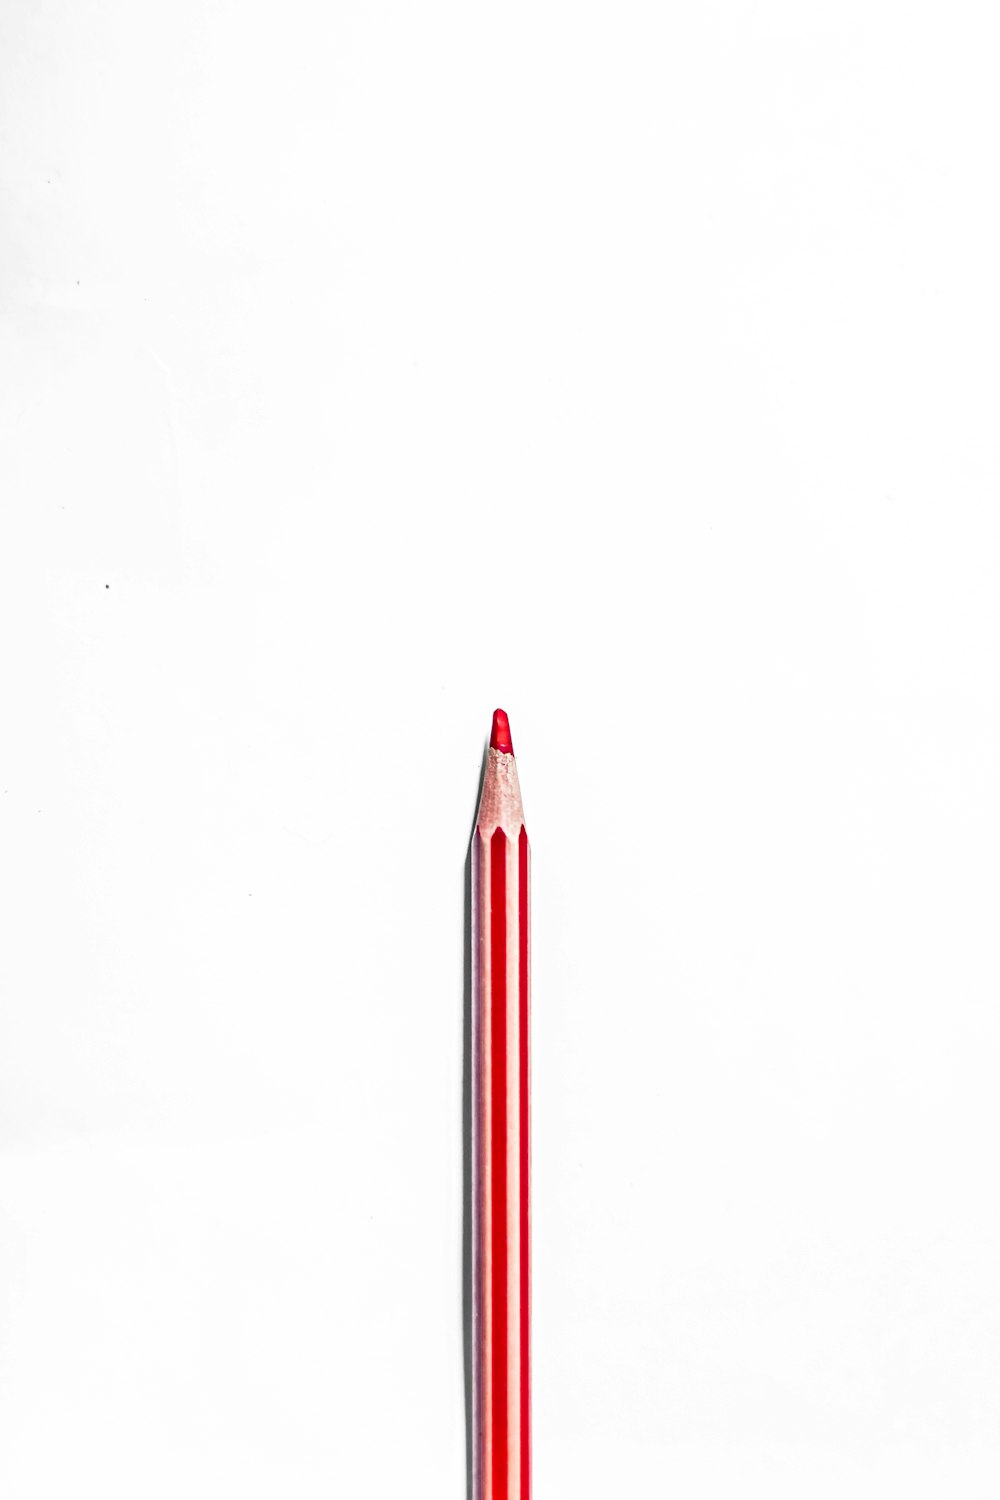 red and white pencil on white surface